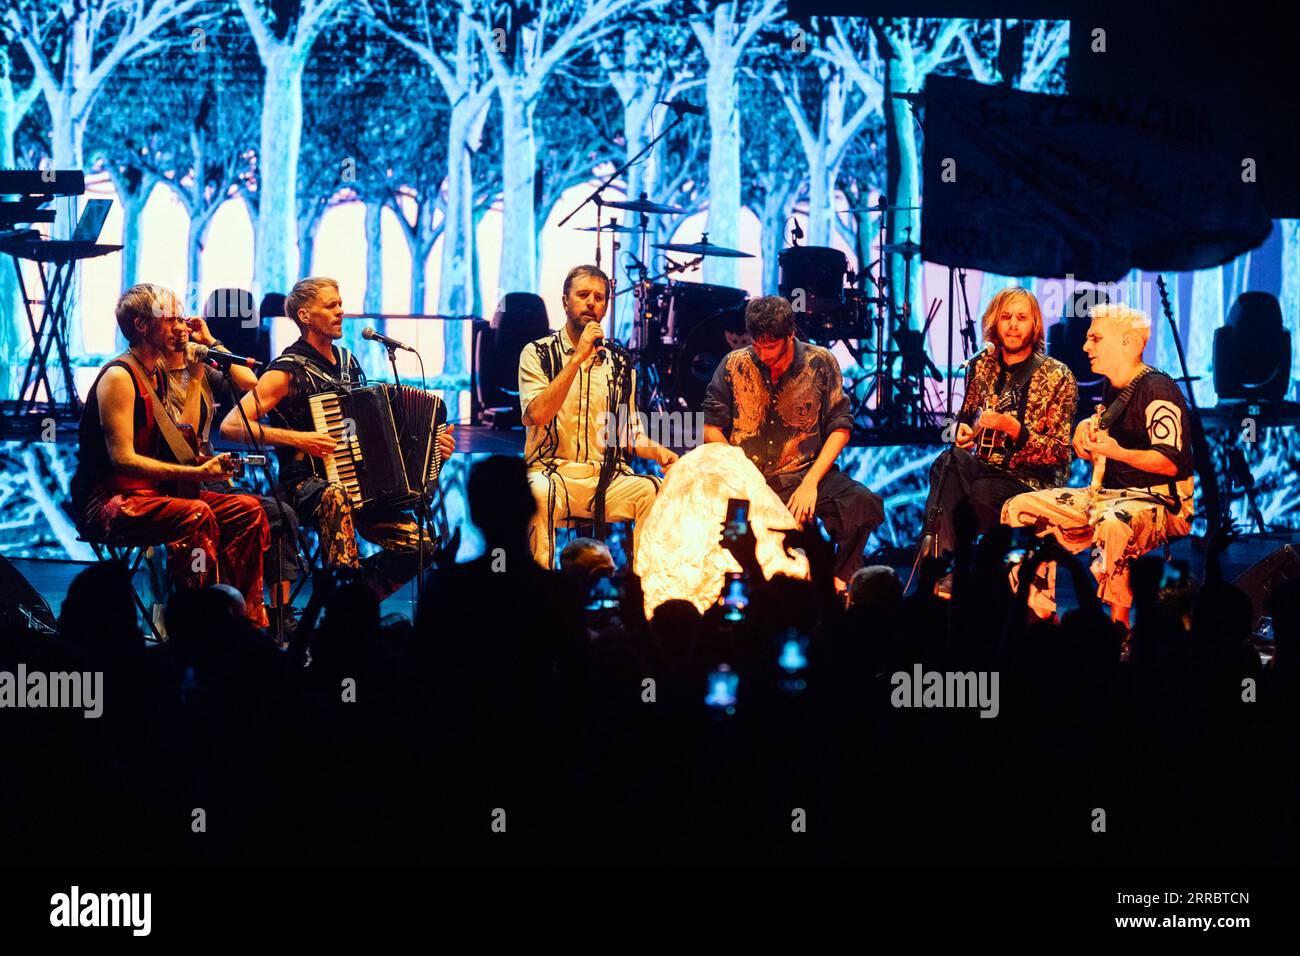 El Plan de la Mariposa (The Butterfly Plan). The Argentine rock band during a concert. Stock Photo